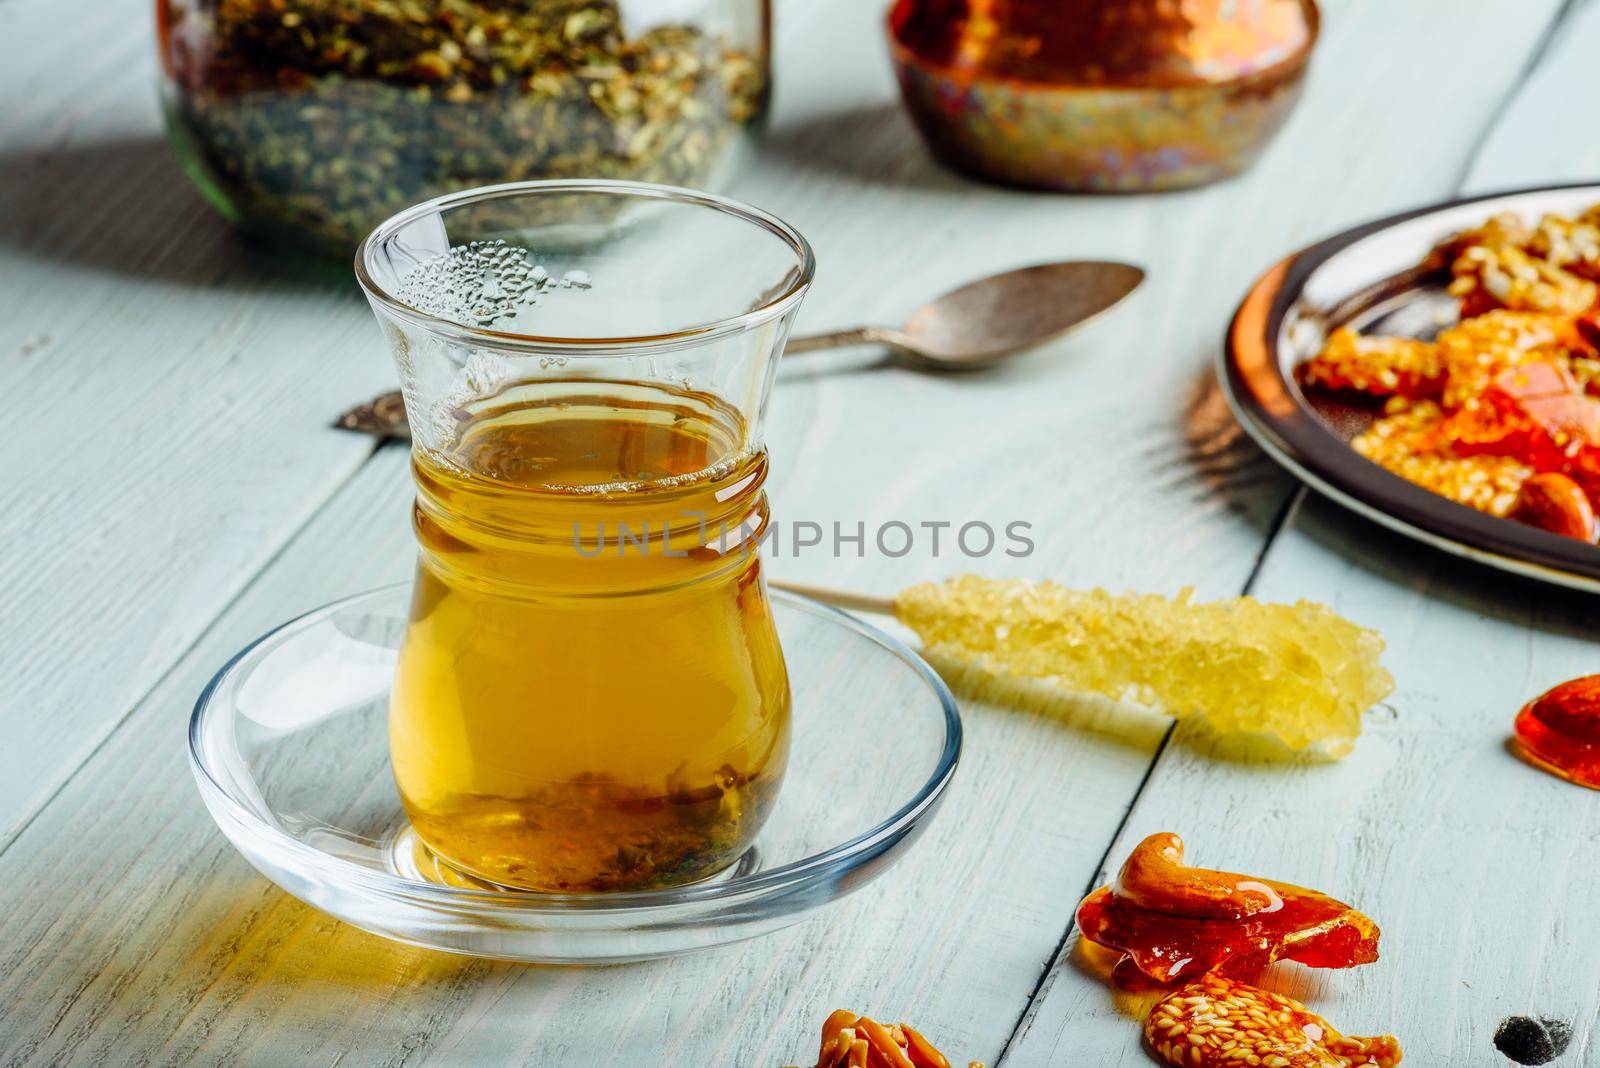 Herbal tea in armudu glass with arabic delights on metal plate over light wooden surface